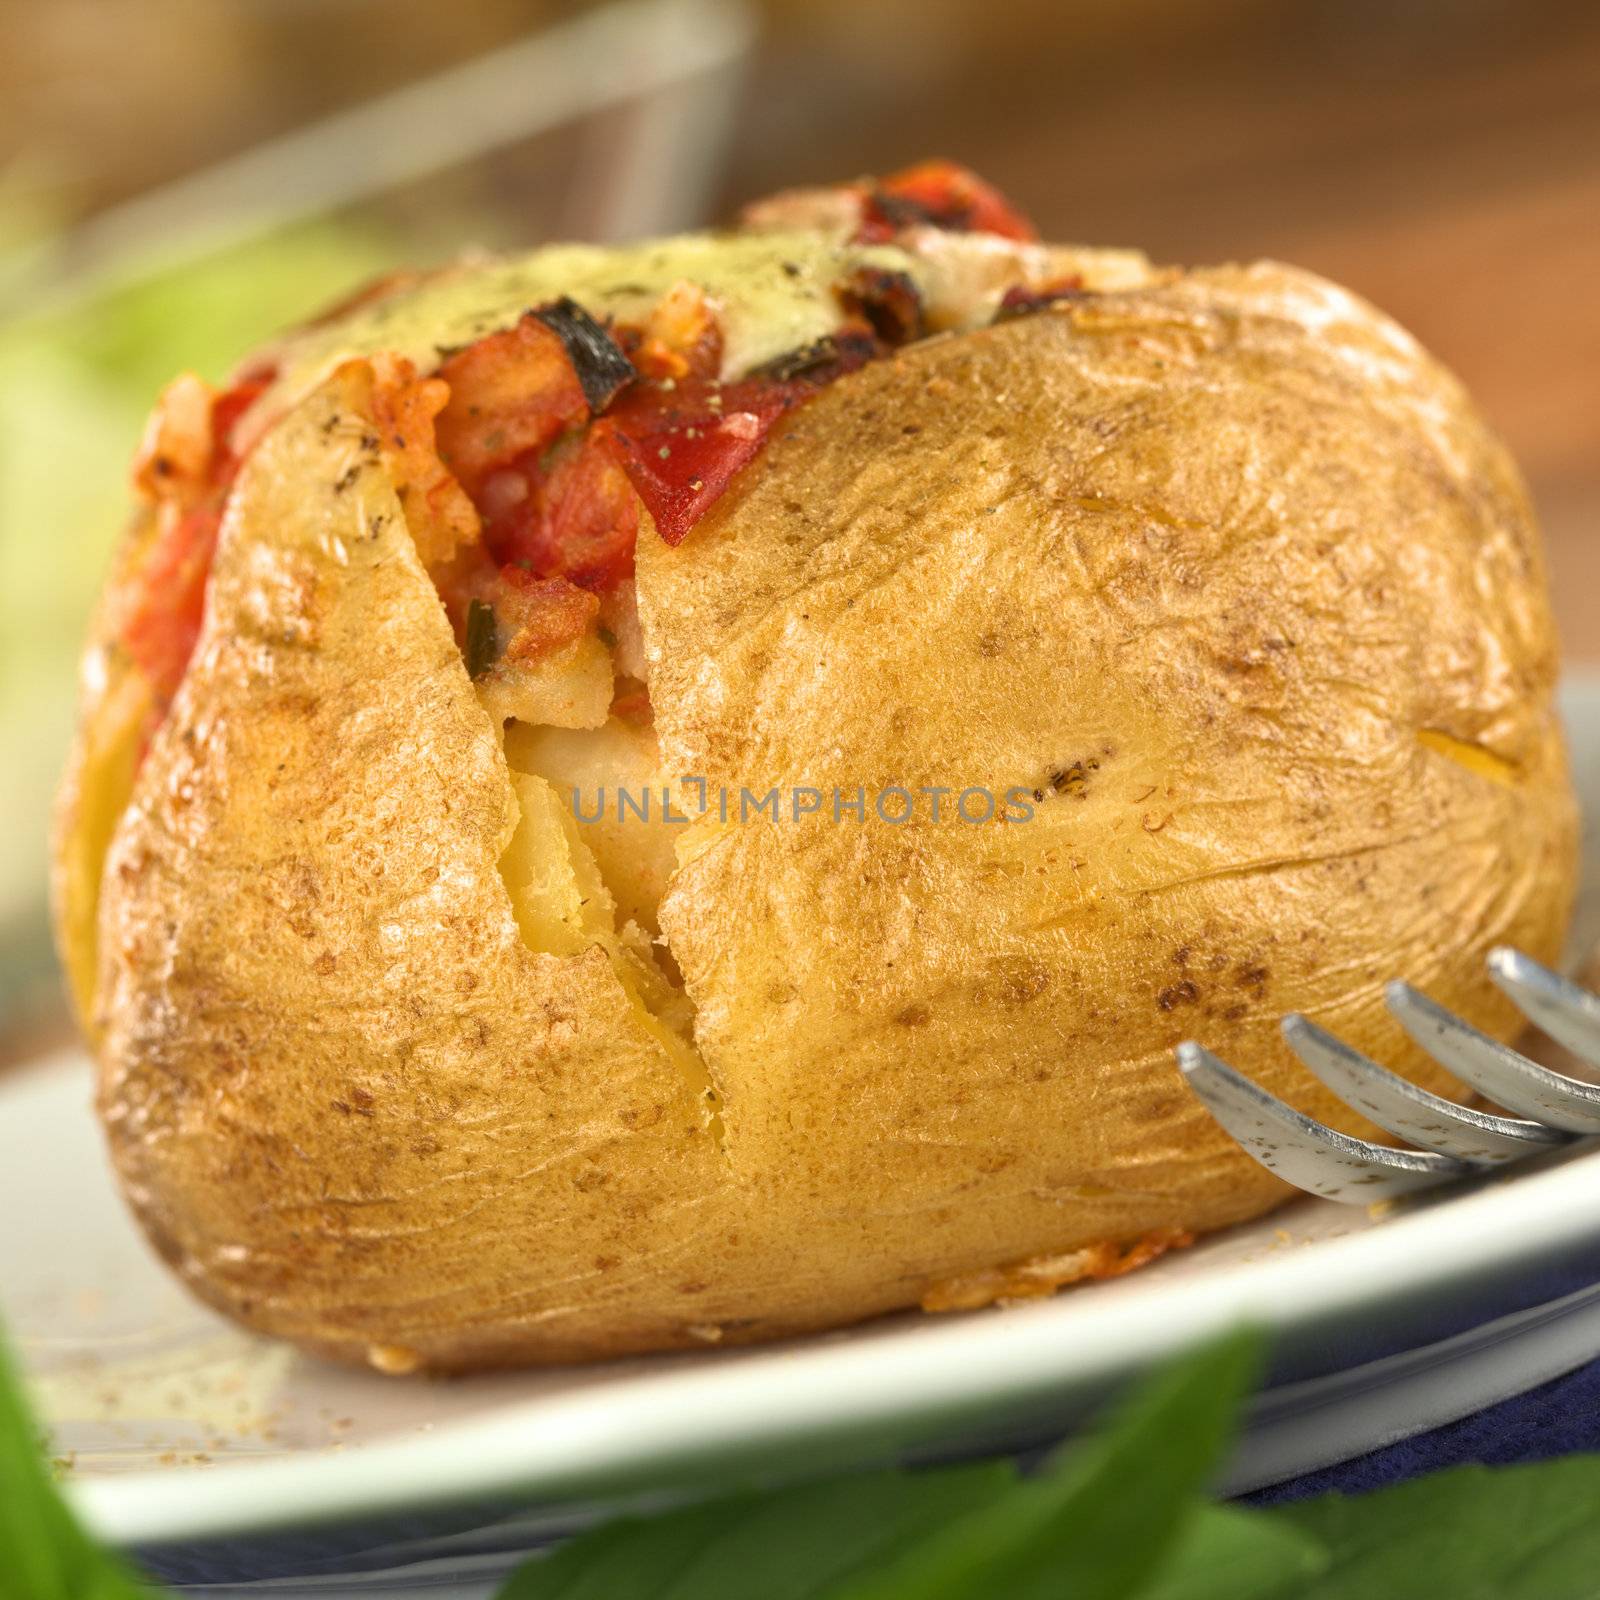 Baked potato with tomato filling and cheese on top (Selective Focus, Focus on the front of potato)